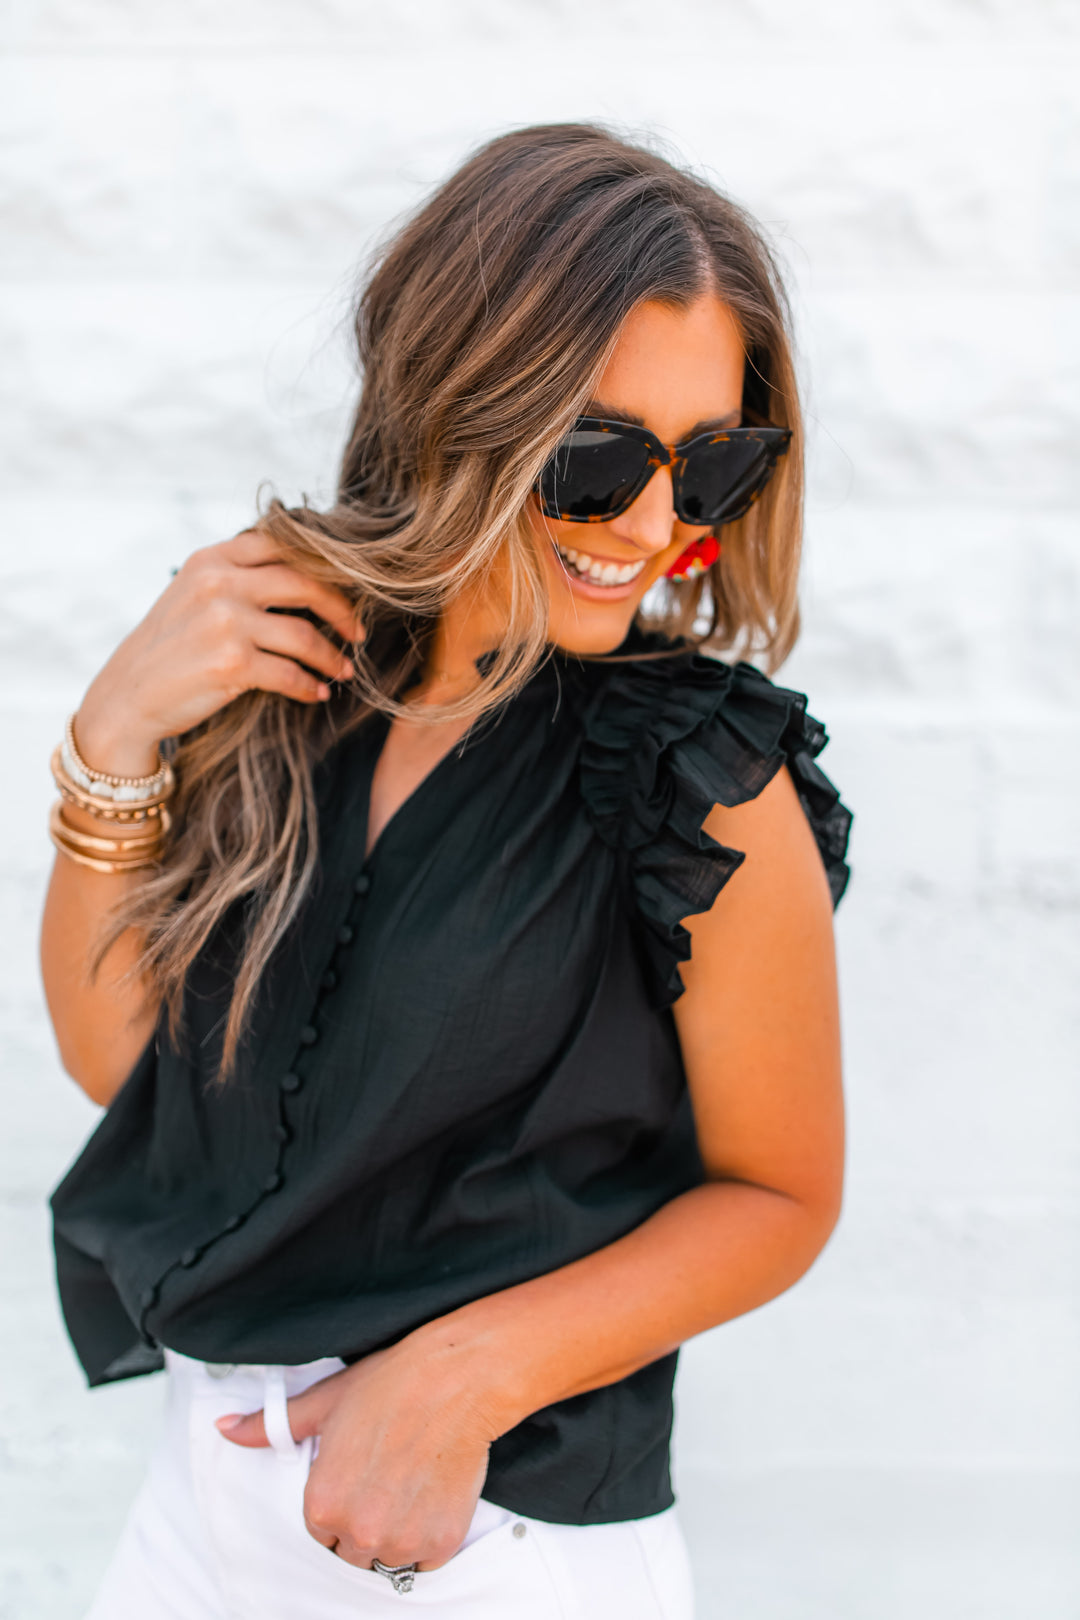 The Harlowe Button Blouse - Black